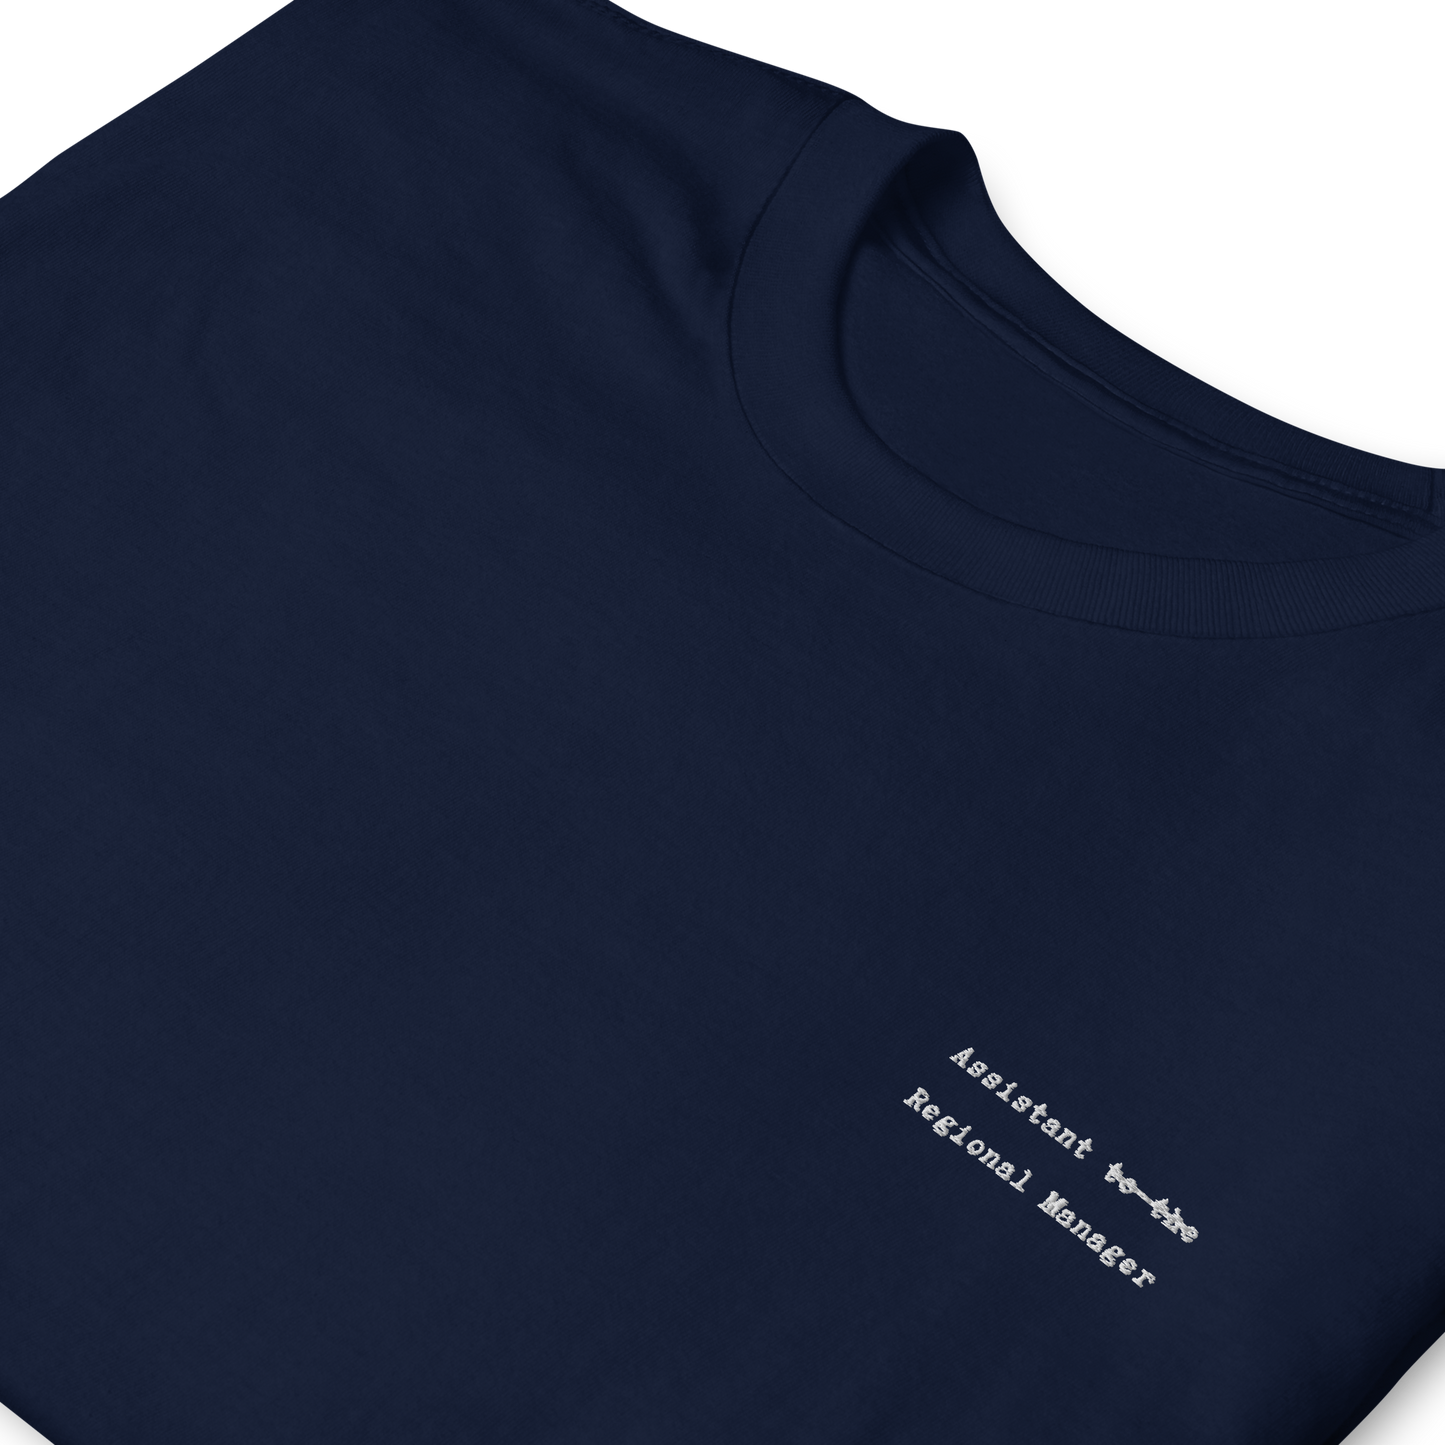 Assistant (to the) Regional Manager T-Shirt